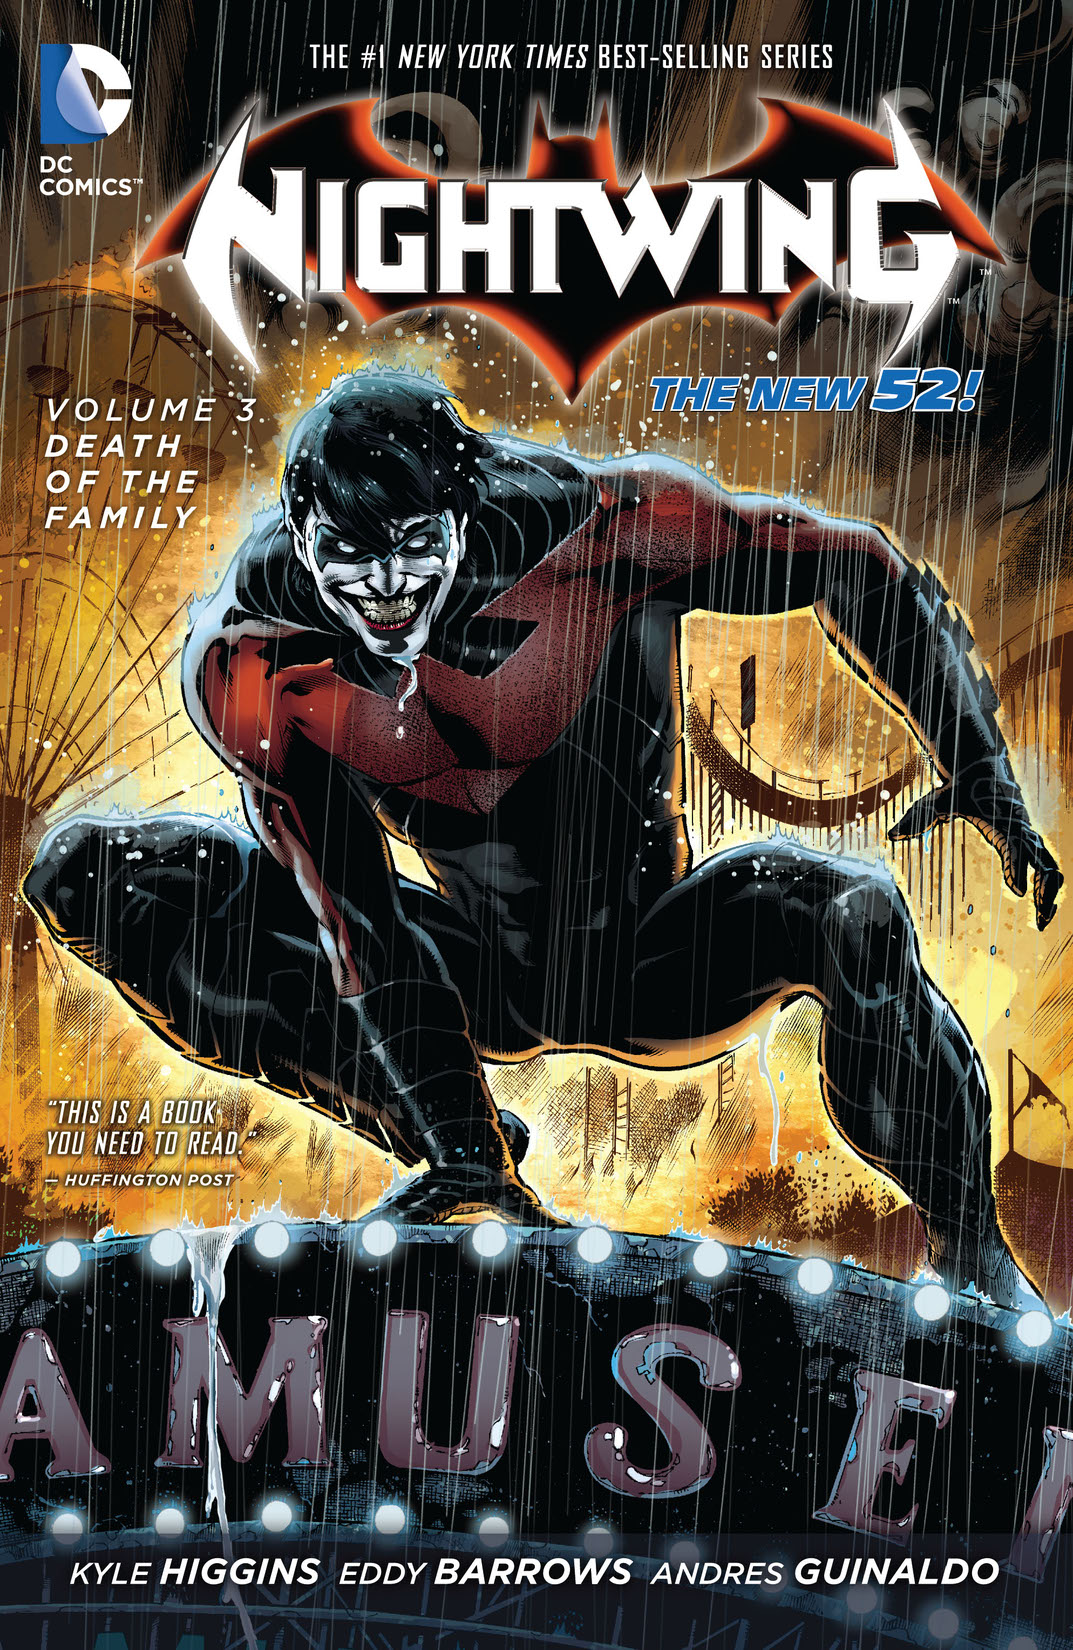 Nightwing Vol. 3: Death of the Family preview images